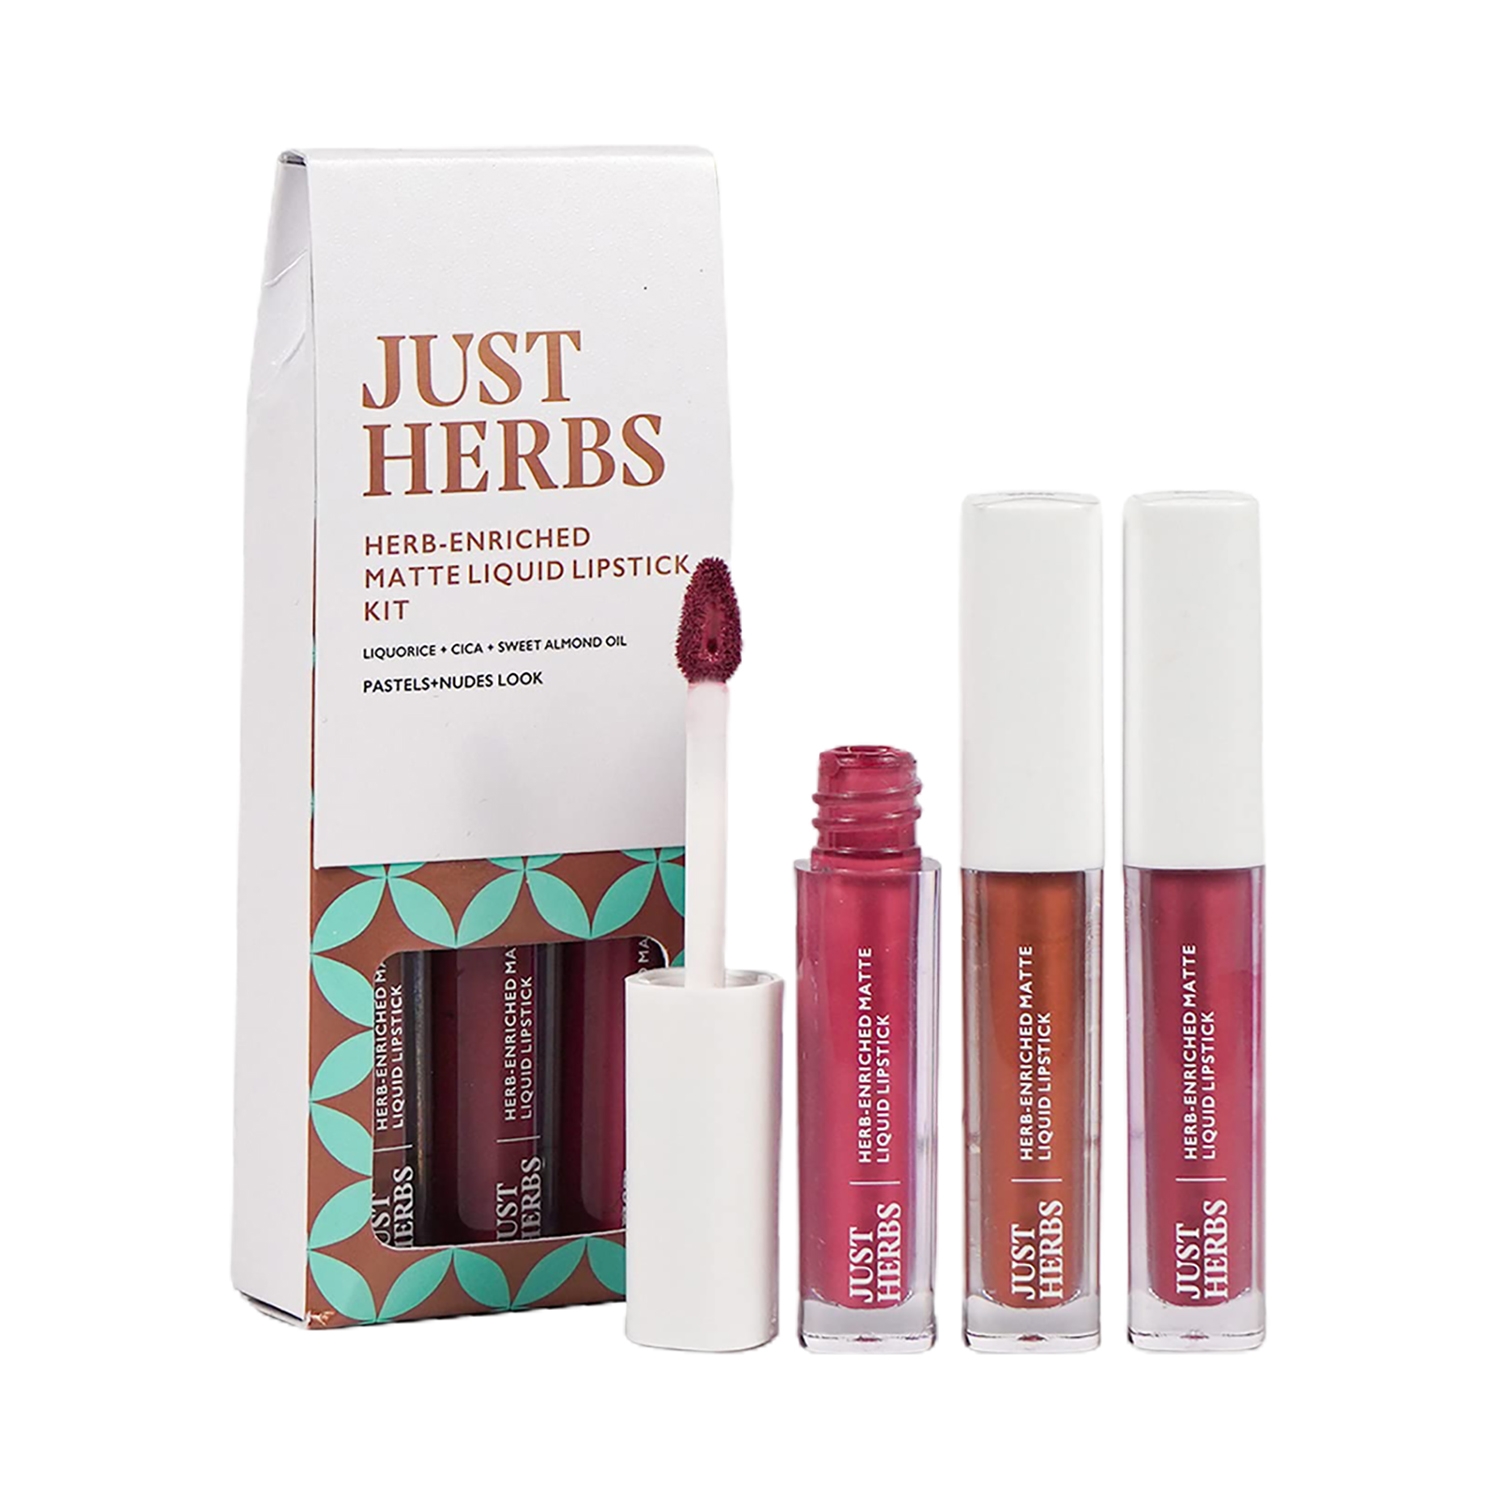 Just Herbs | Just Herbs Enriched Matte Liquid Lipstick - Raspberry Pink, Cinnamon Spice and Rosewood Pink (3 Pcs)